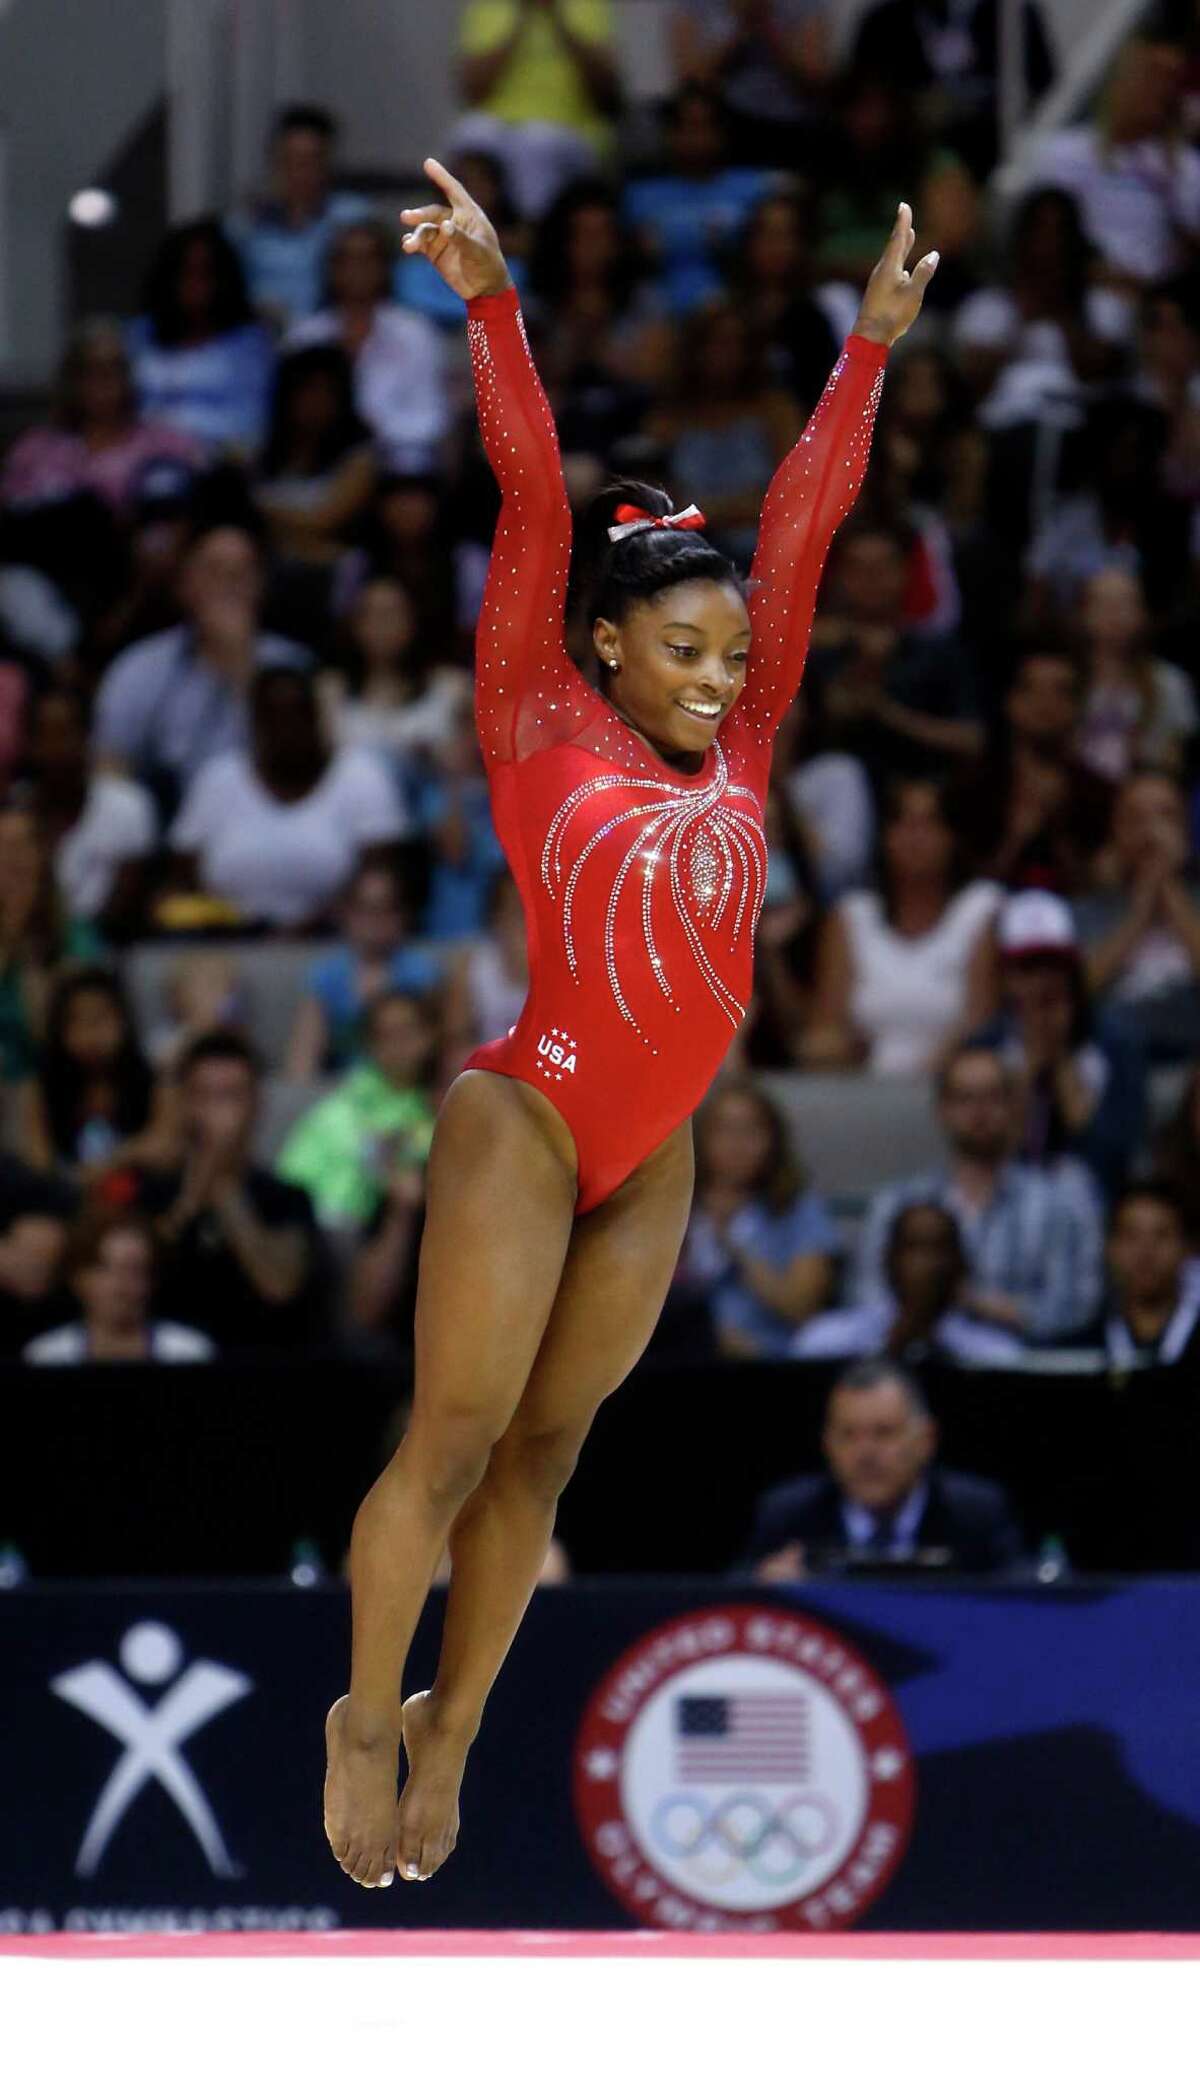 Spring's Biles poised for perfection in Rio Games